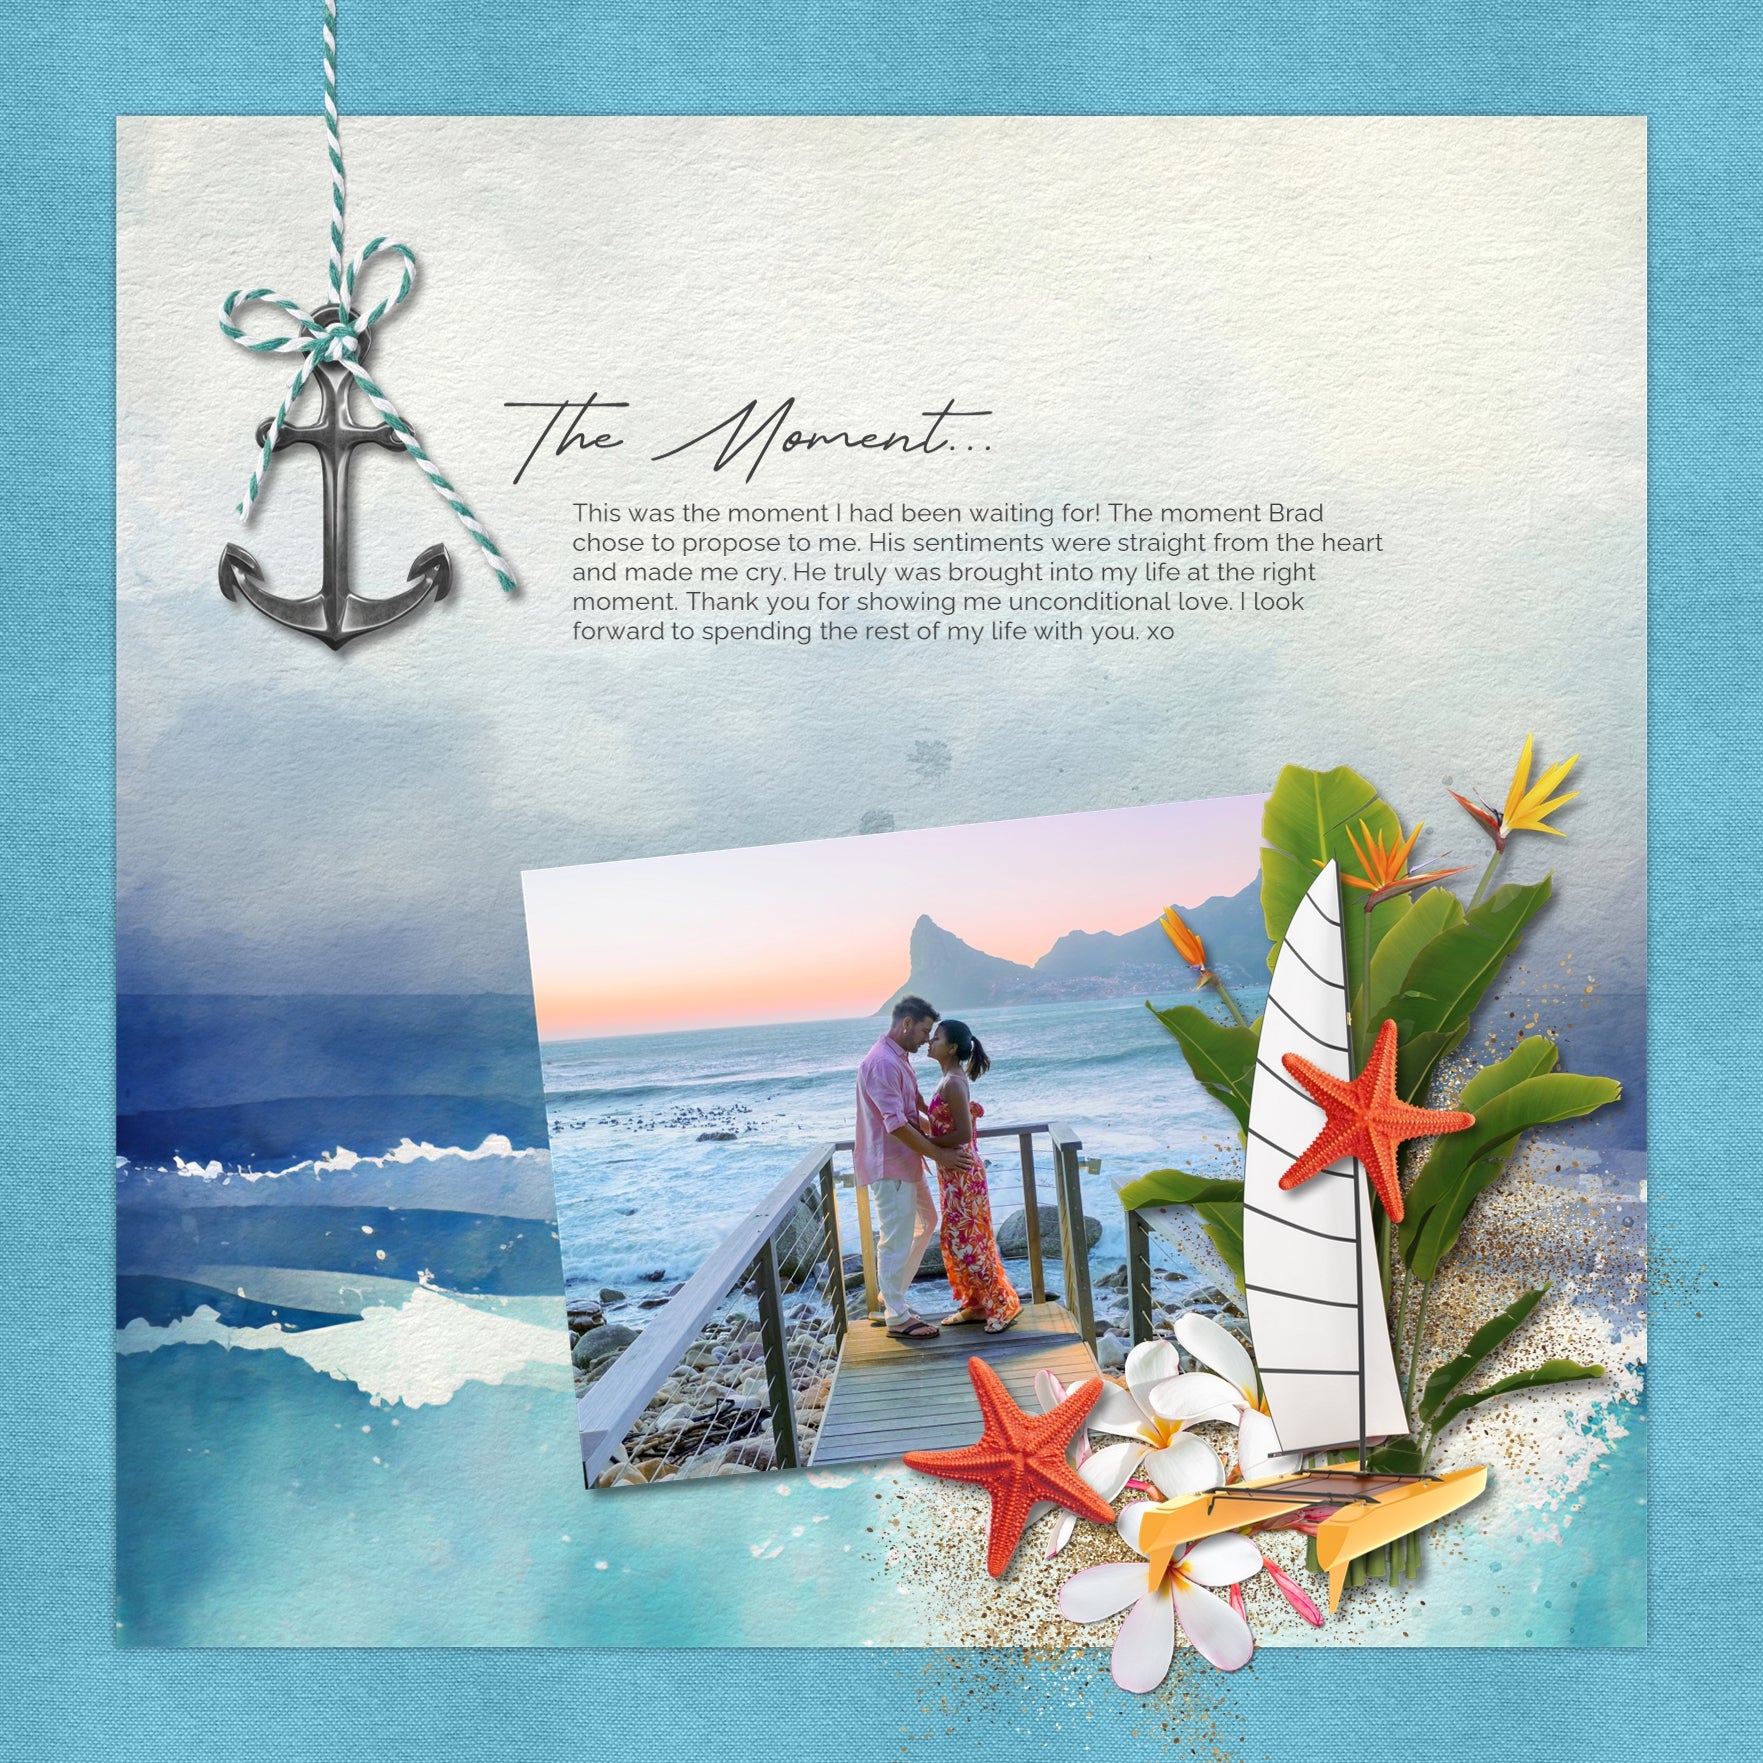 Highlight your tropical vacation and cruise ship excursion memories with these beautiful realistic digital embellishments and watercolor papers by Lucky Girl Creative. Great for holidays to Hawaii, the Caribbean, Florida, California, cruise ship adventures, and beach vacations.